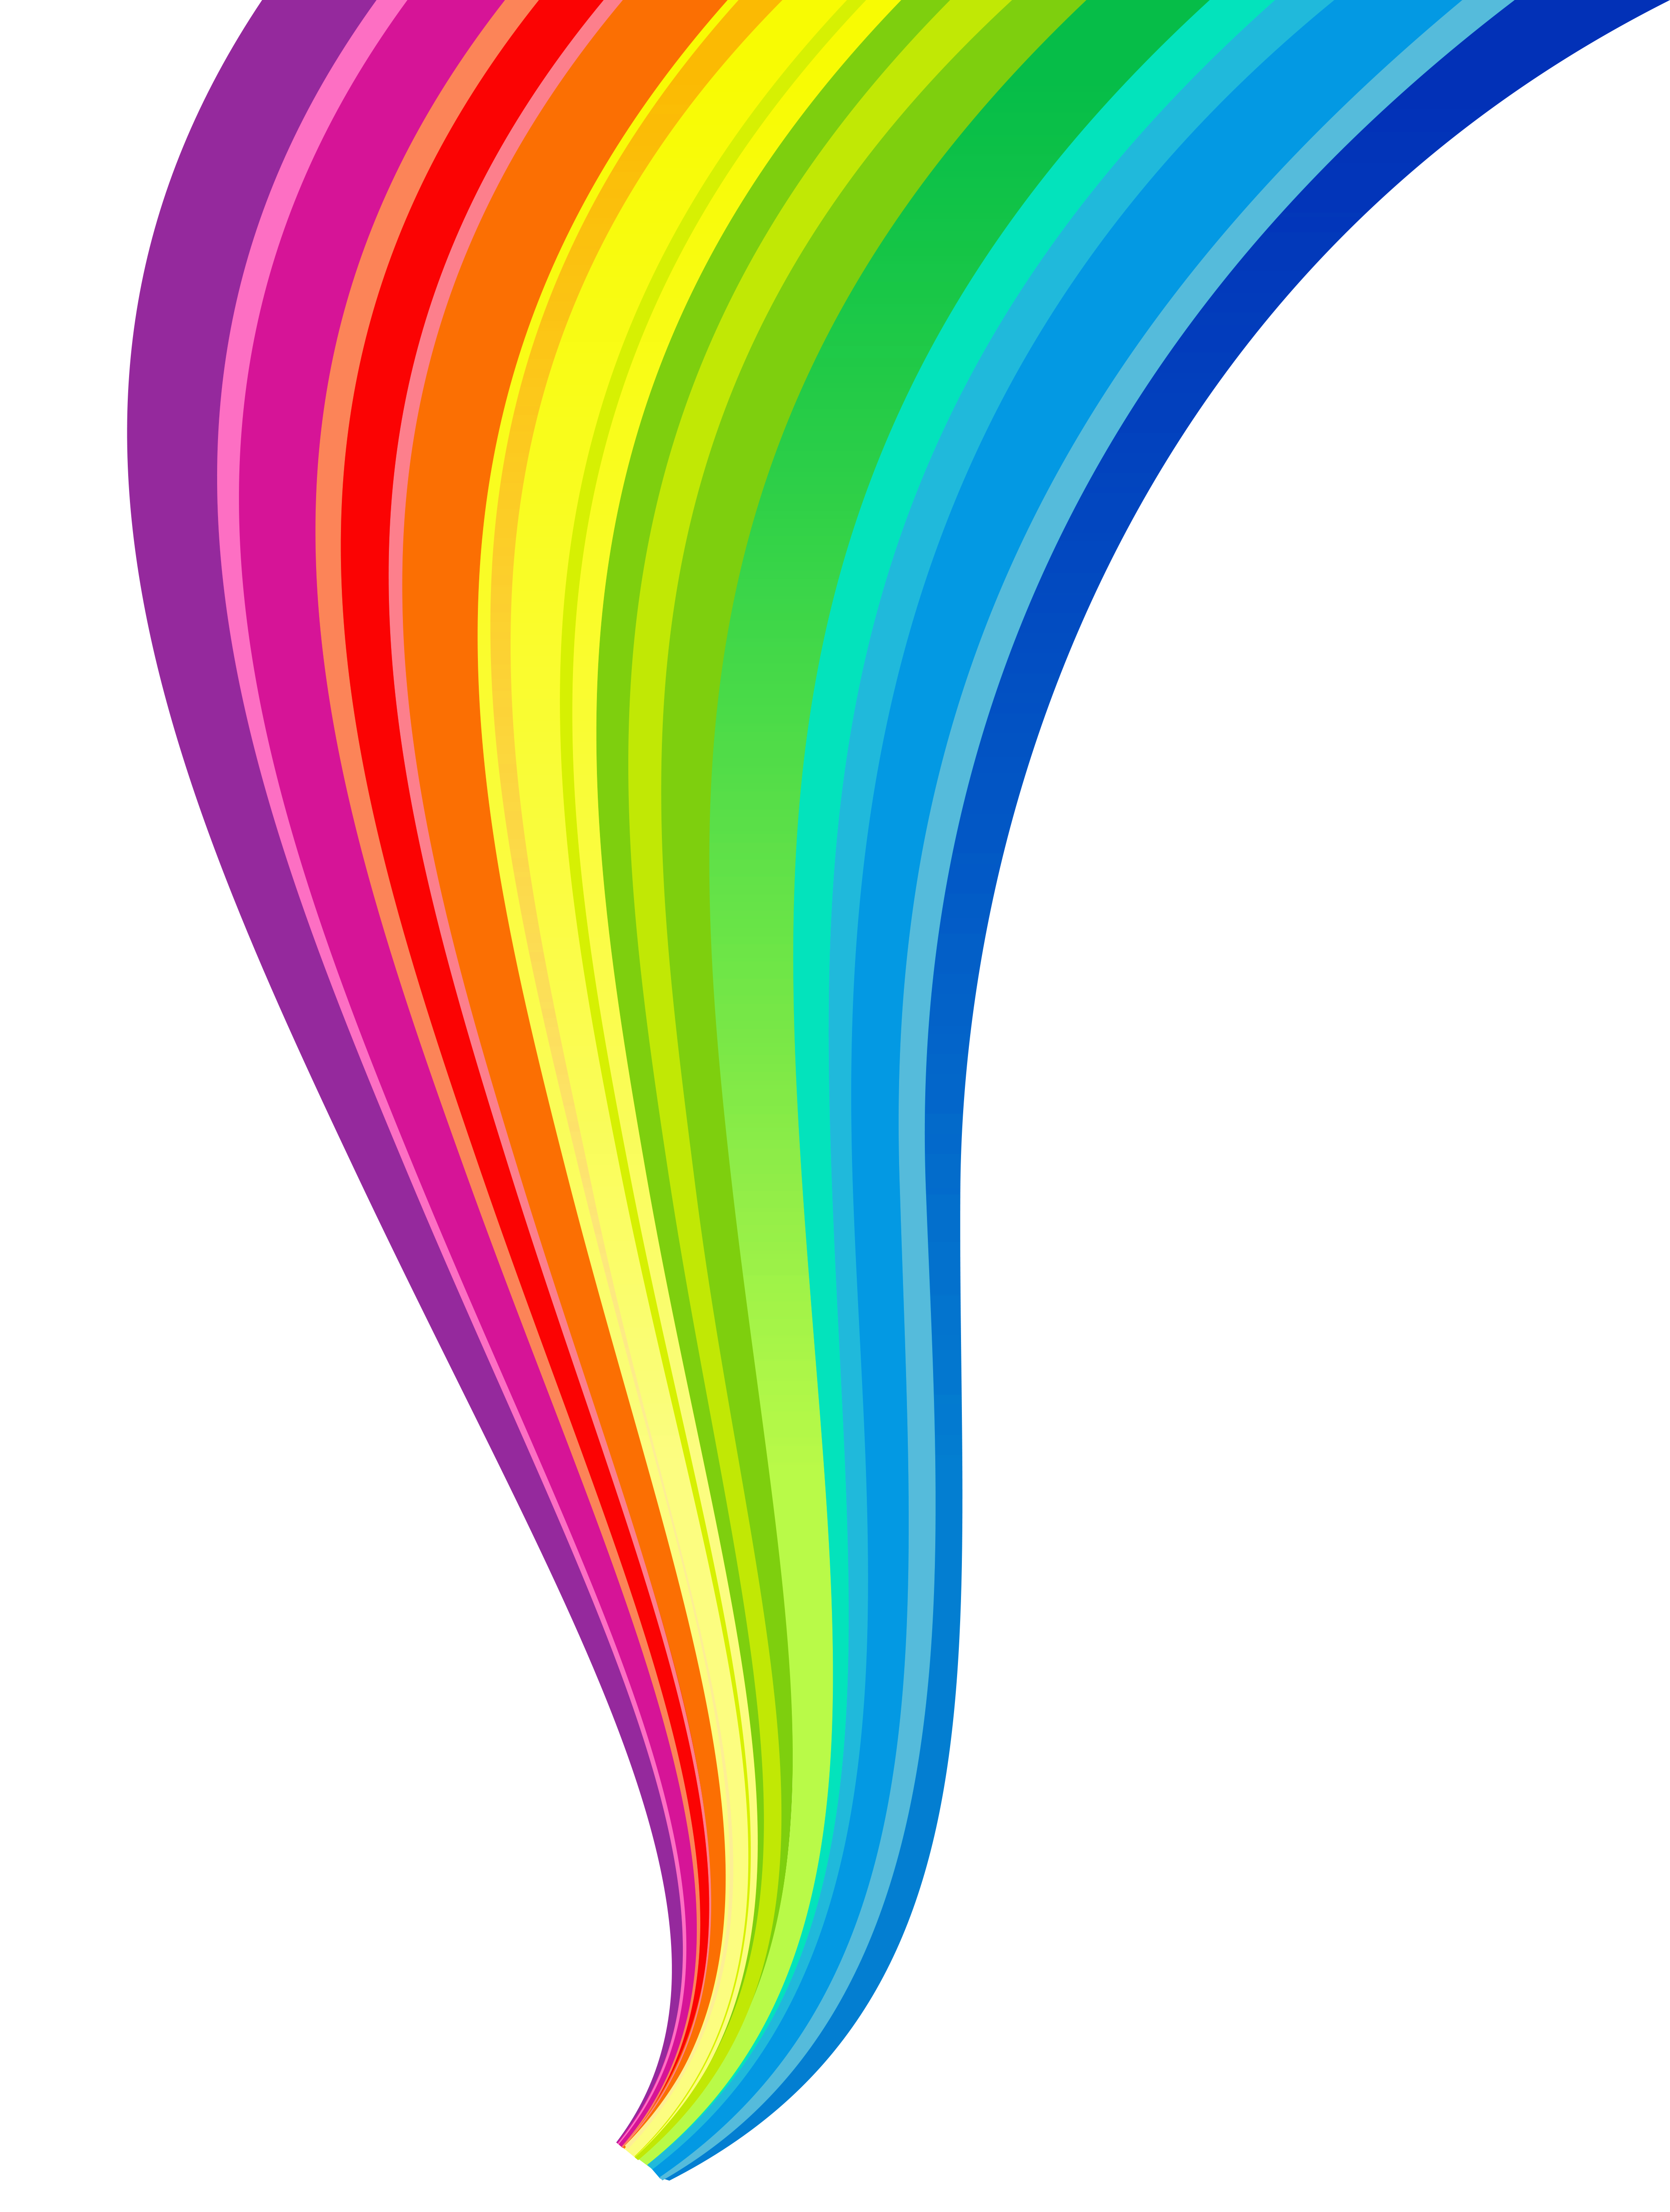 Rainbow Clip Art to Download - dbclipart.com